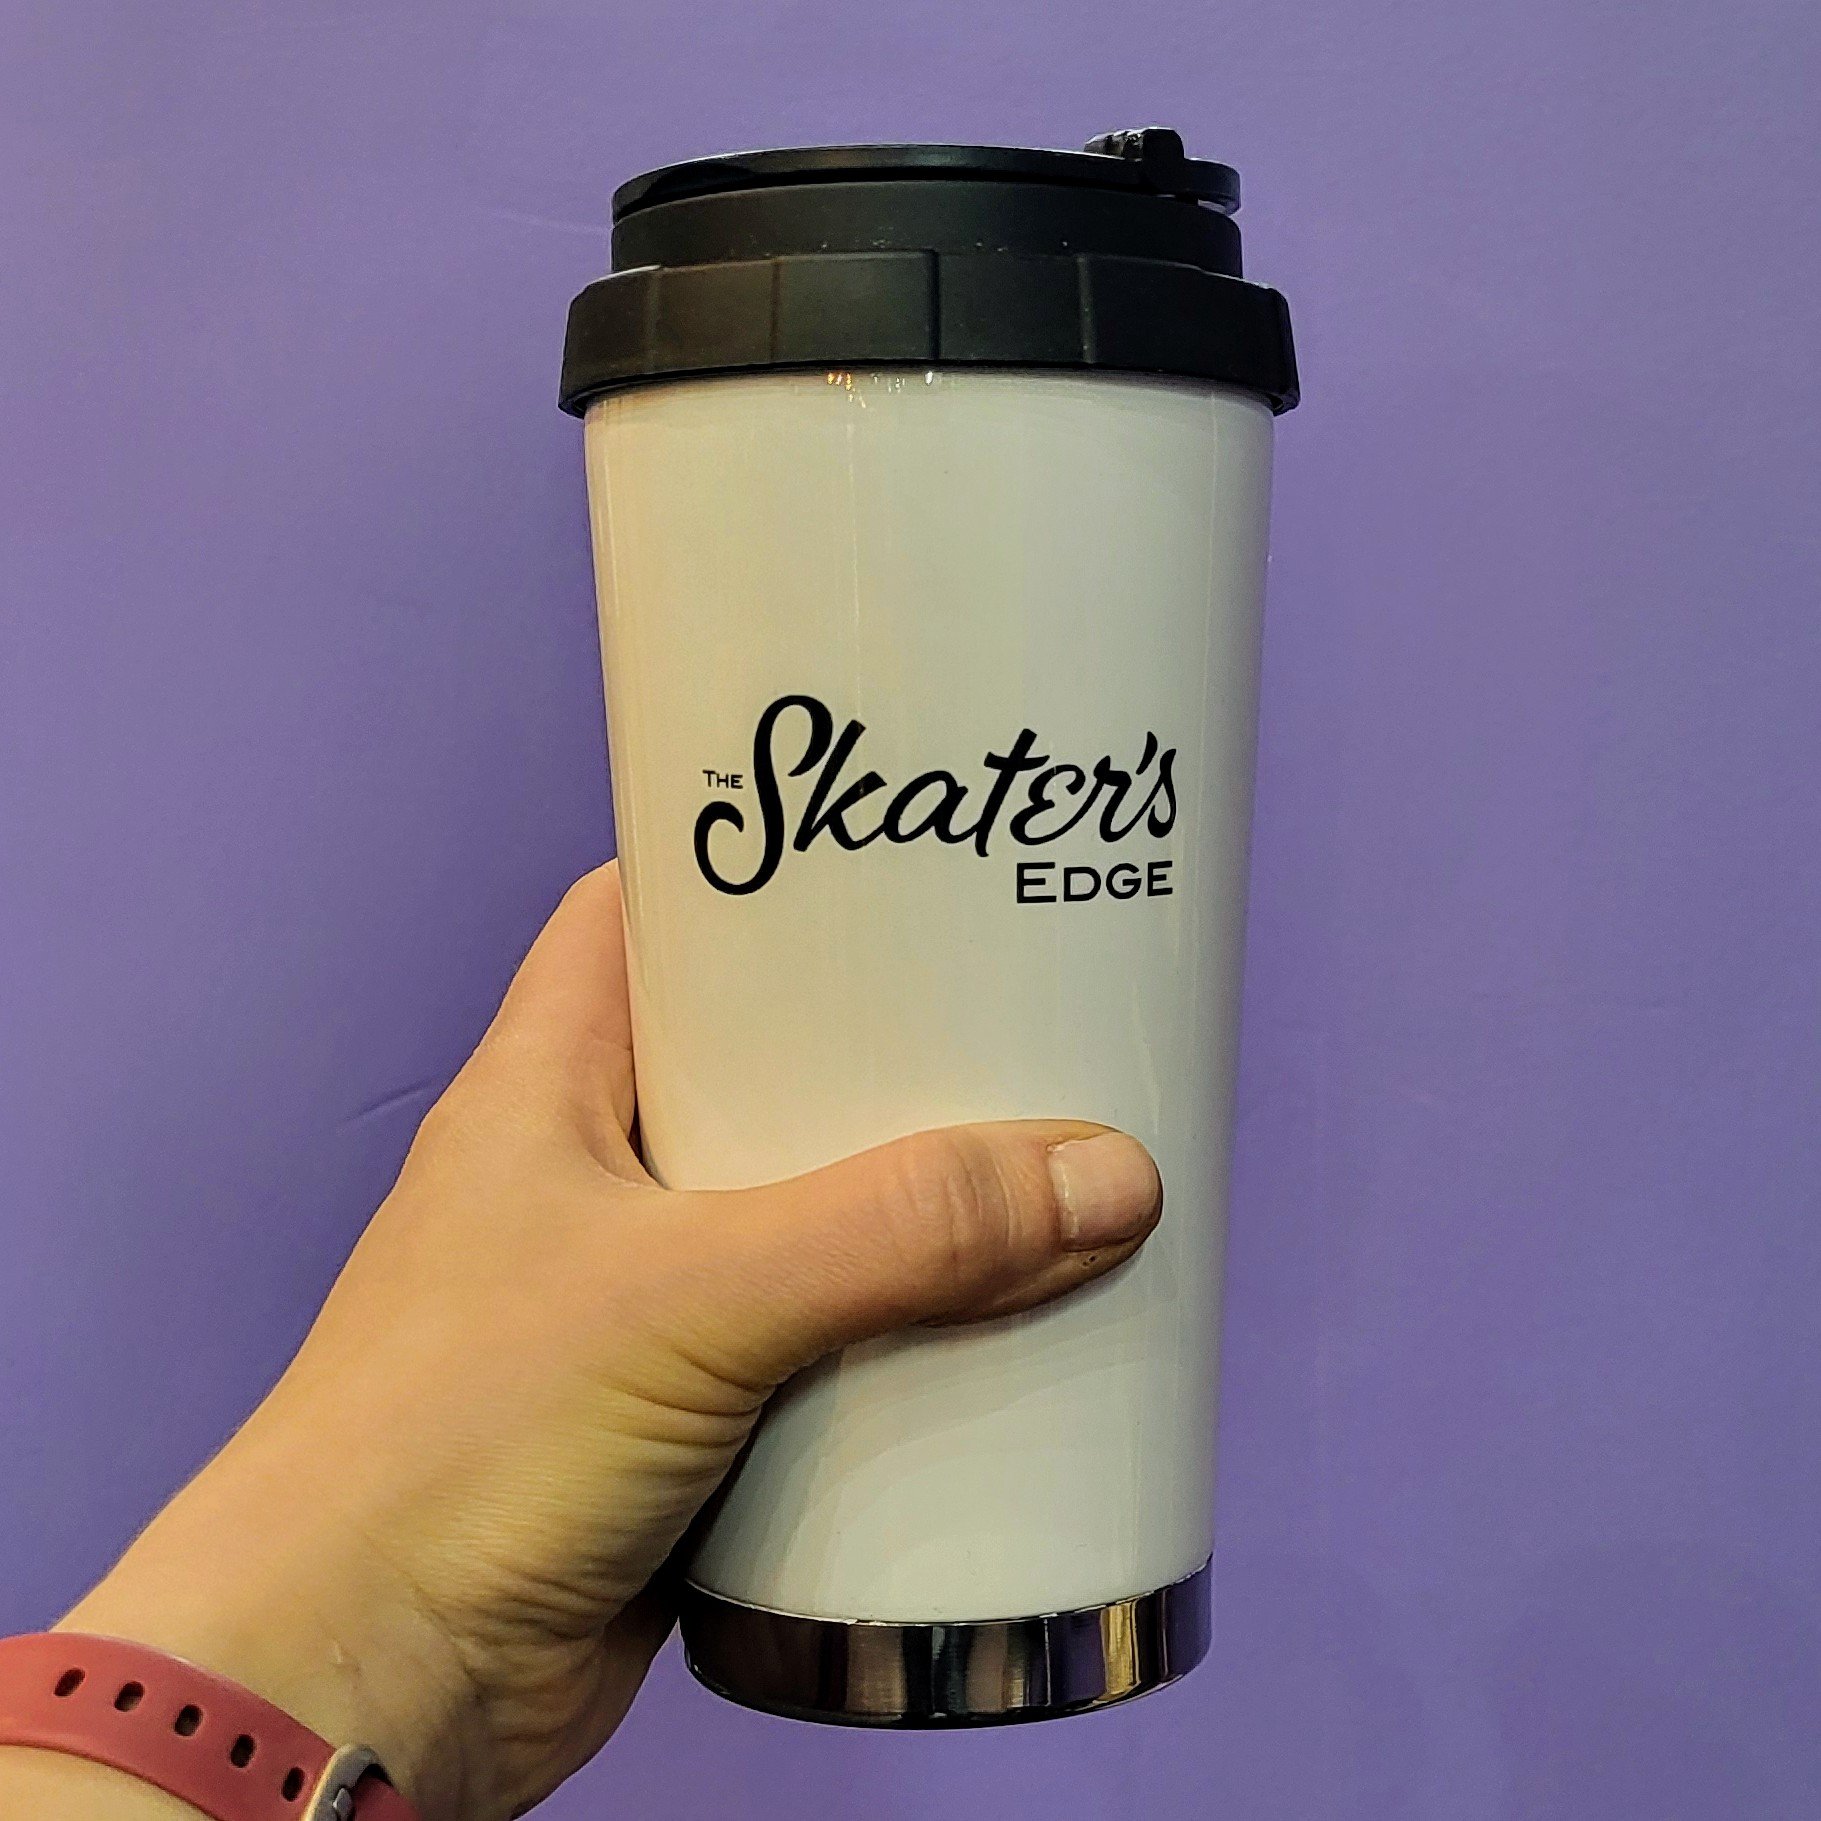 We call it the Shirt Shop, but it's not just shirts!

We have travel mugs like this, ceramic mugs, hats, belt bags, and stickers too 😍

Browse the Shop Merch tab on our website to see all our goodies designed with skaters (and SkateMoms and SkateDad